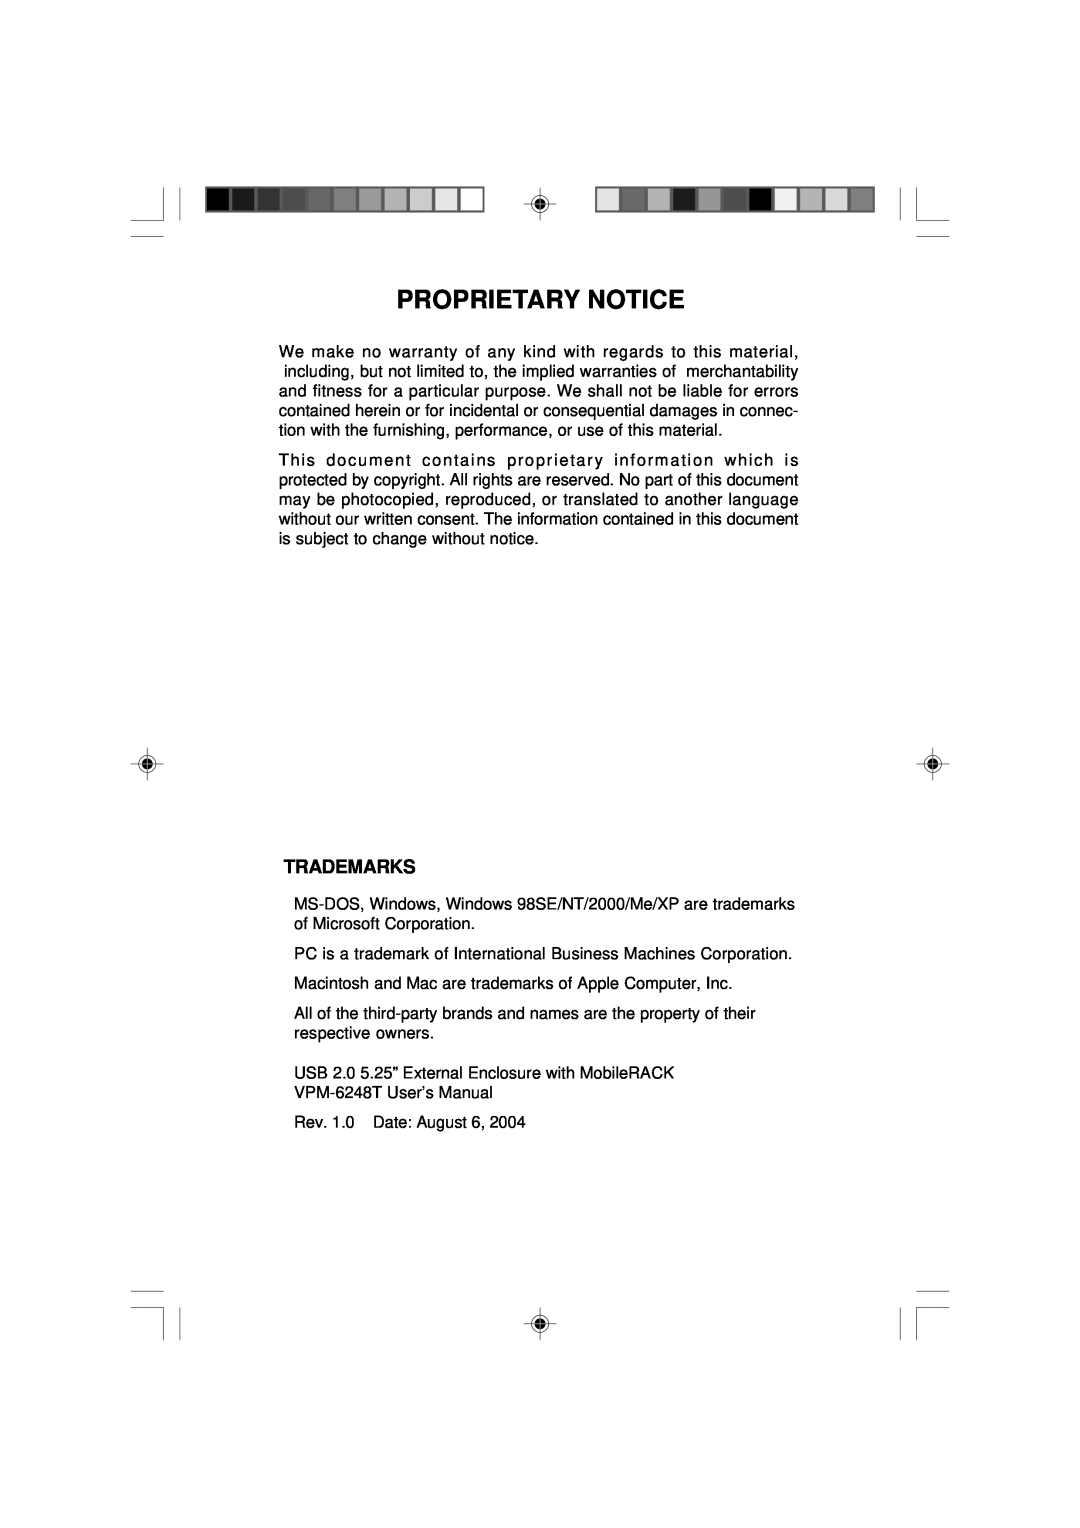 VIPowER VPM-6248T user manual Proprietary Notice, Trademarks 